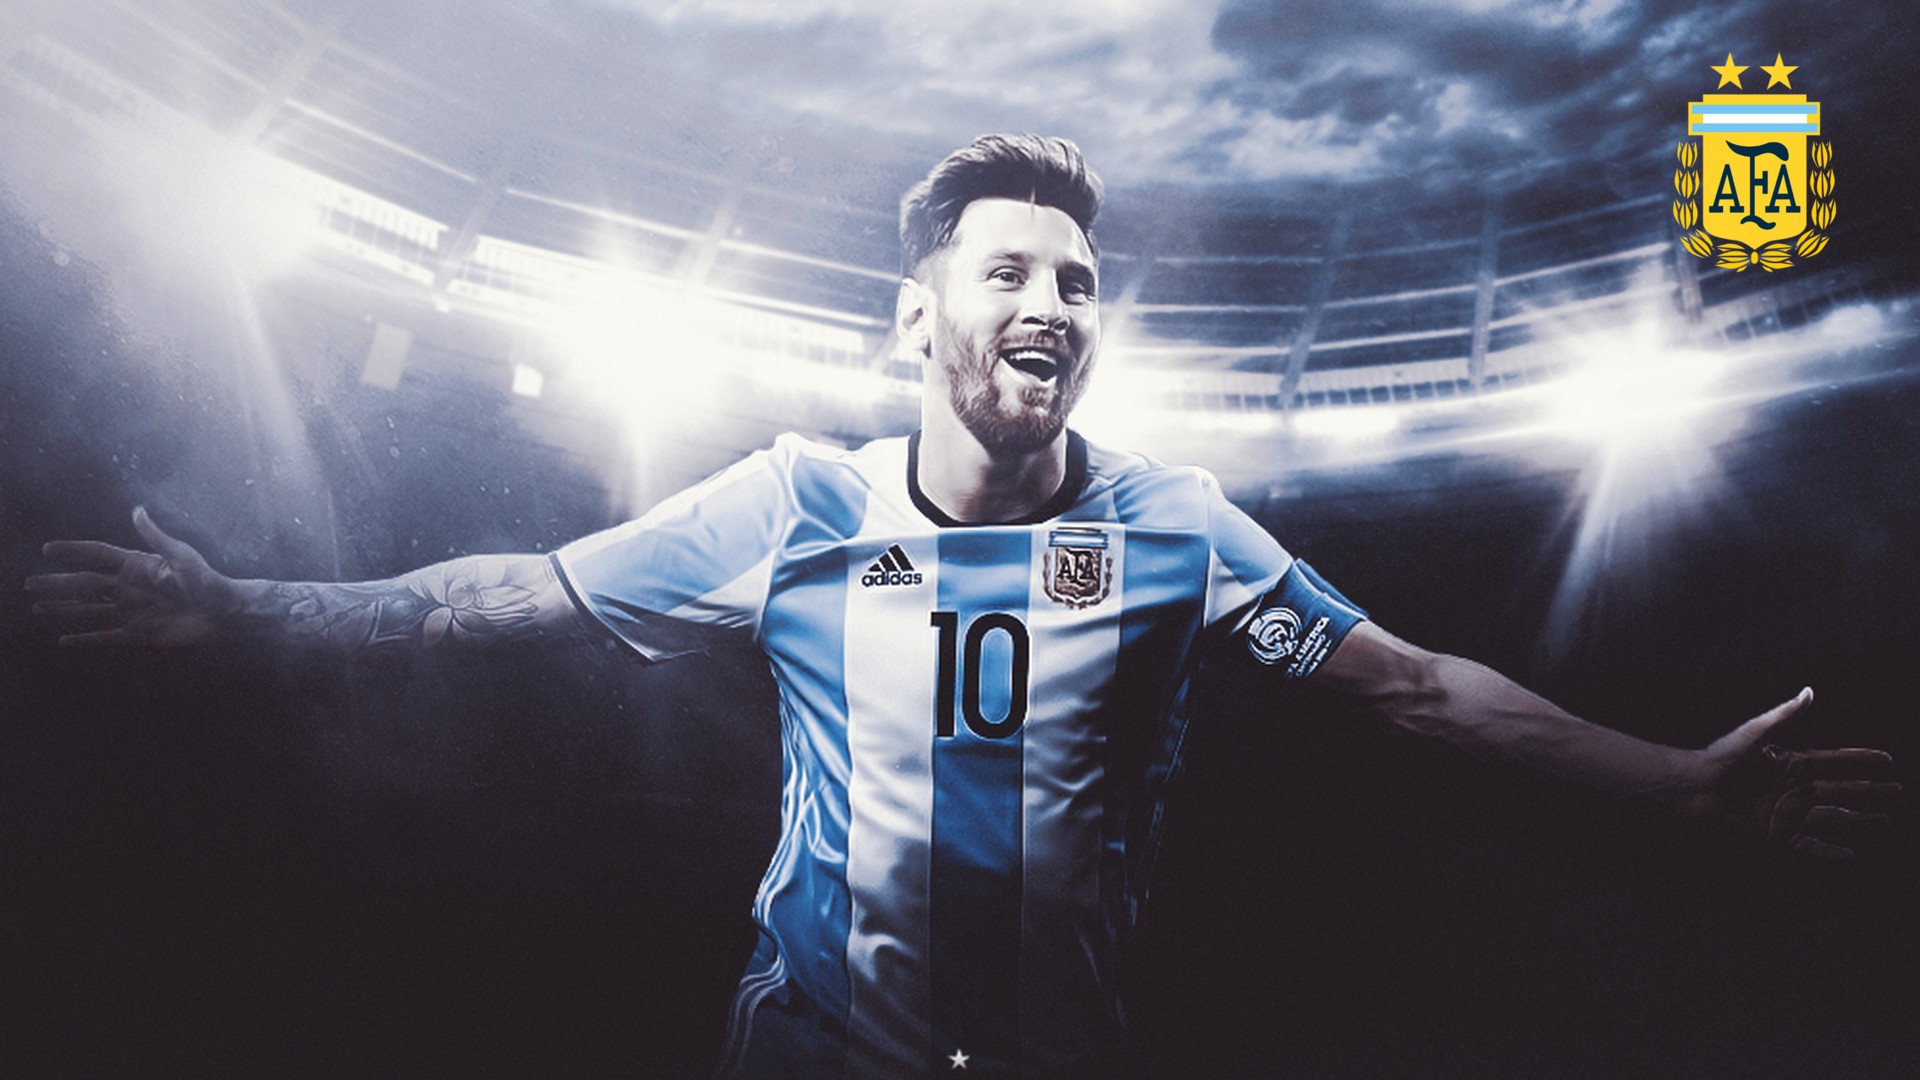 Windows Wallpaper Messi Argentina With Resolution 1920X1080 pixel. You can make this wallpaper for your Mac or Windows Desktop Background, iPhone, Android or Tablet and another Smartphone device for free